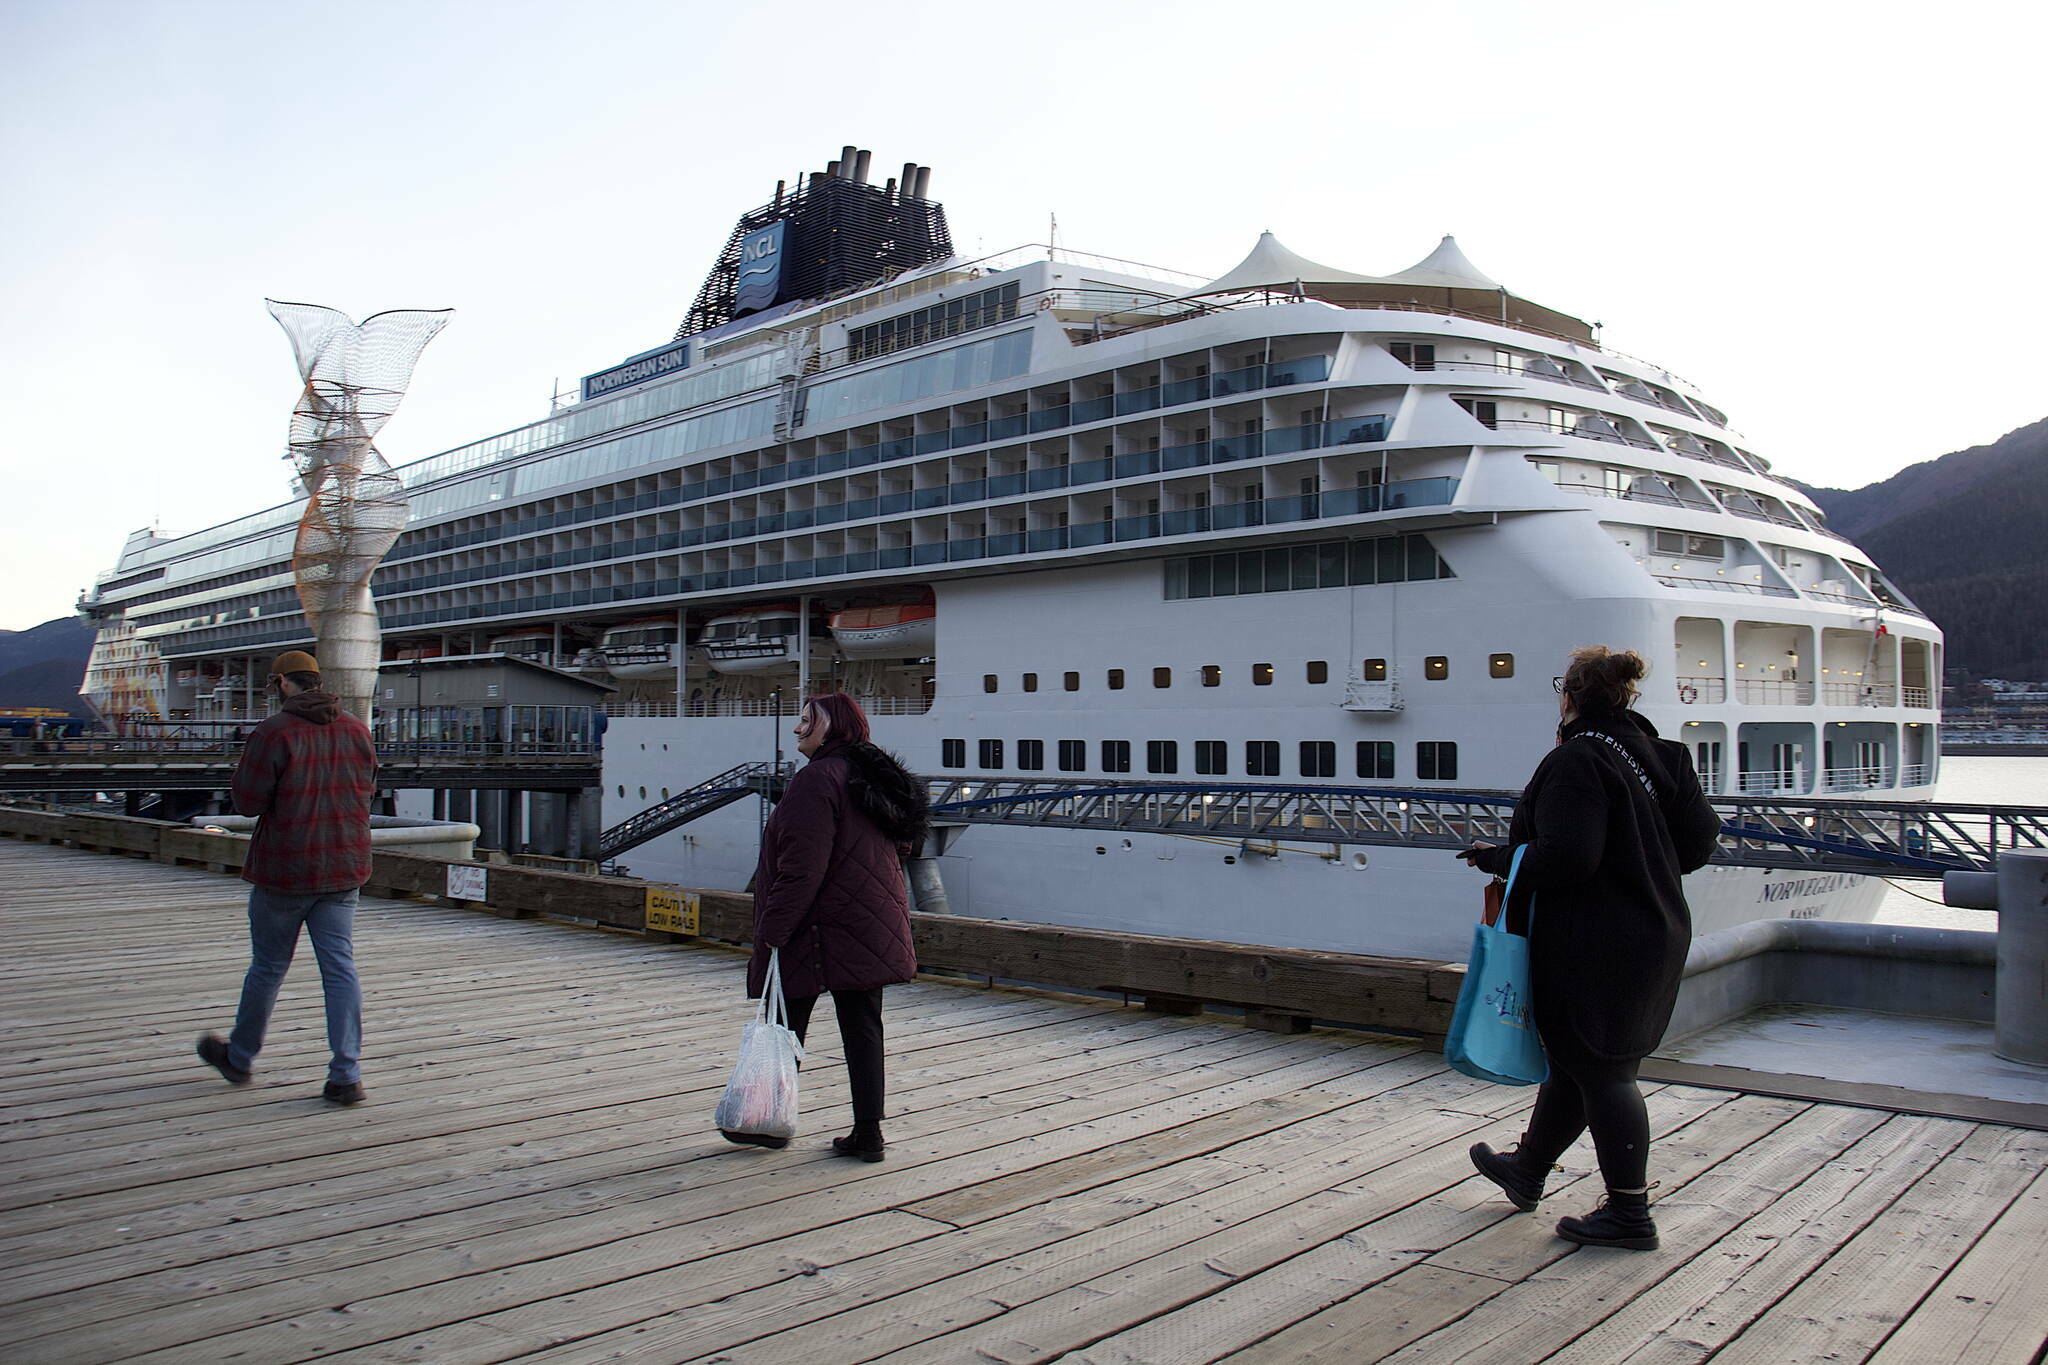 Passengers return to the Norwegian Sun cruise ship on Wednesday, Oct. 25, the final day of a record year for the industry in Juneau. (Mark Sabbatini / Juneau Empire file photo)